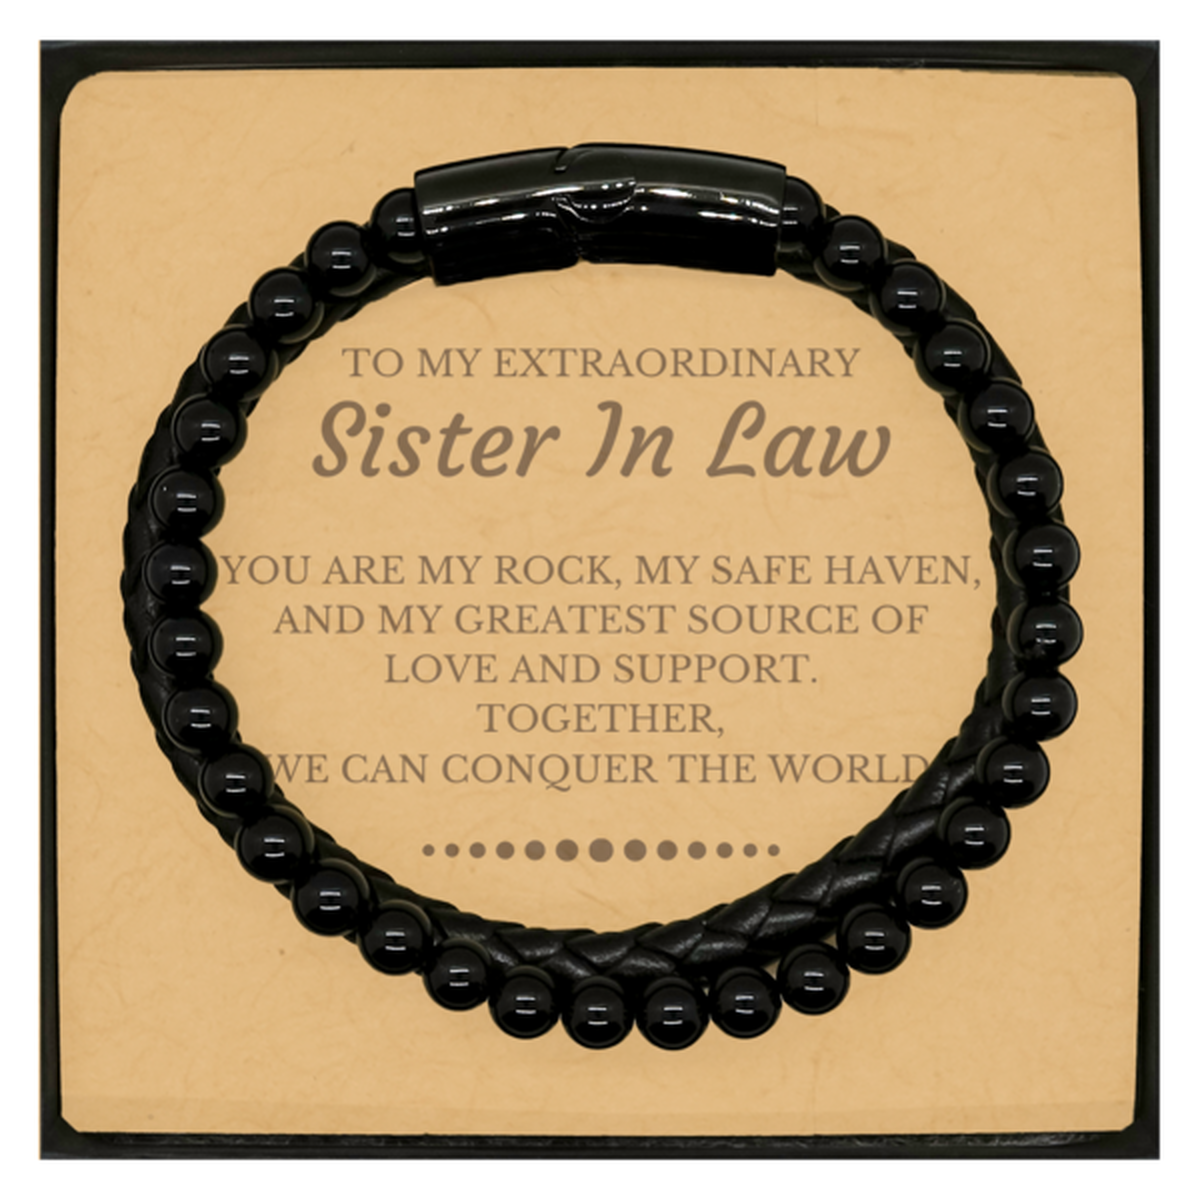 To My Extraordinary Sister In Law Gifts, Together, we can conquer the world, Birthday Christmas Stone Leather Bracelets For Sister In Law, Christmas Gifts For Sister In Law